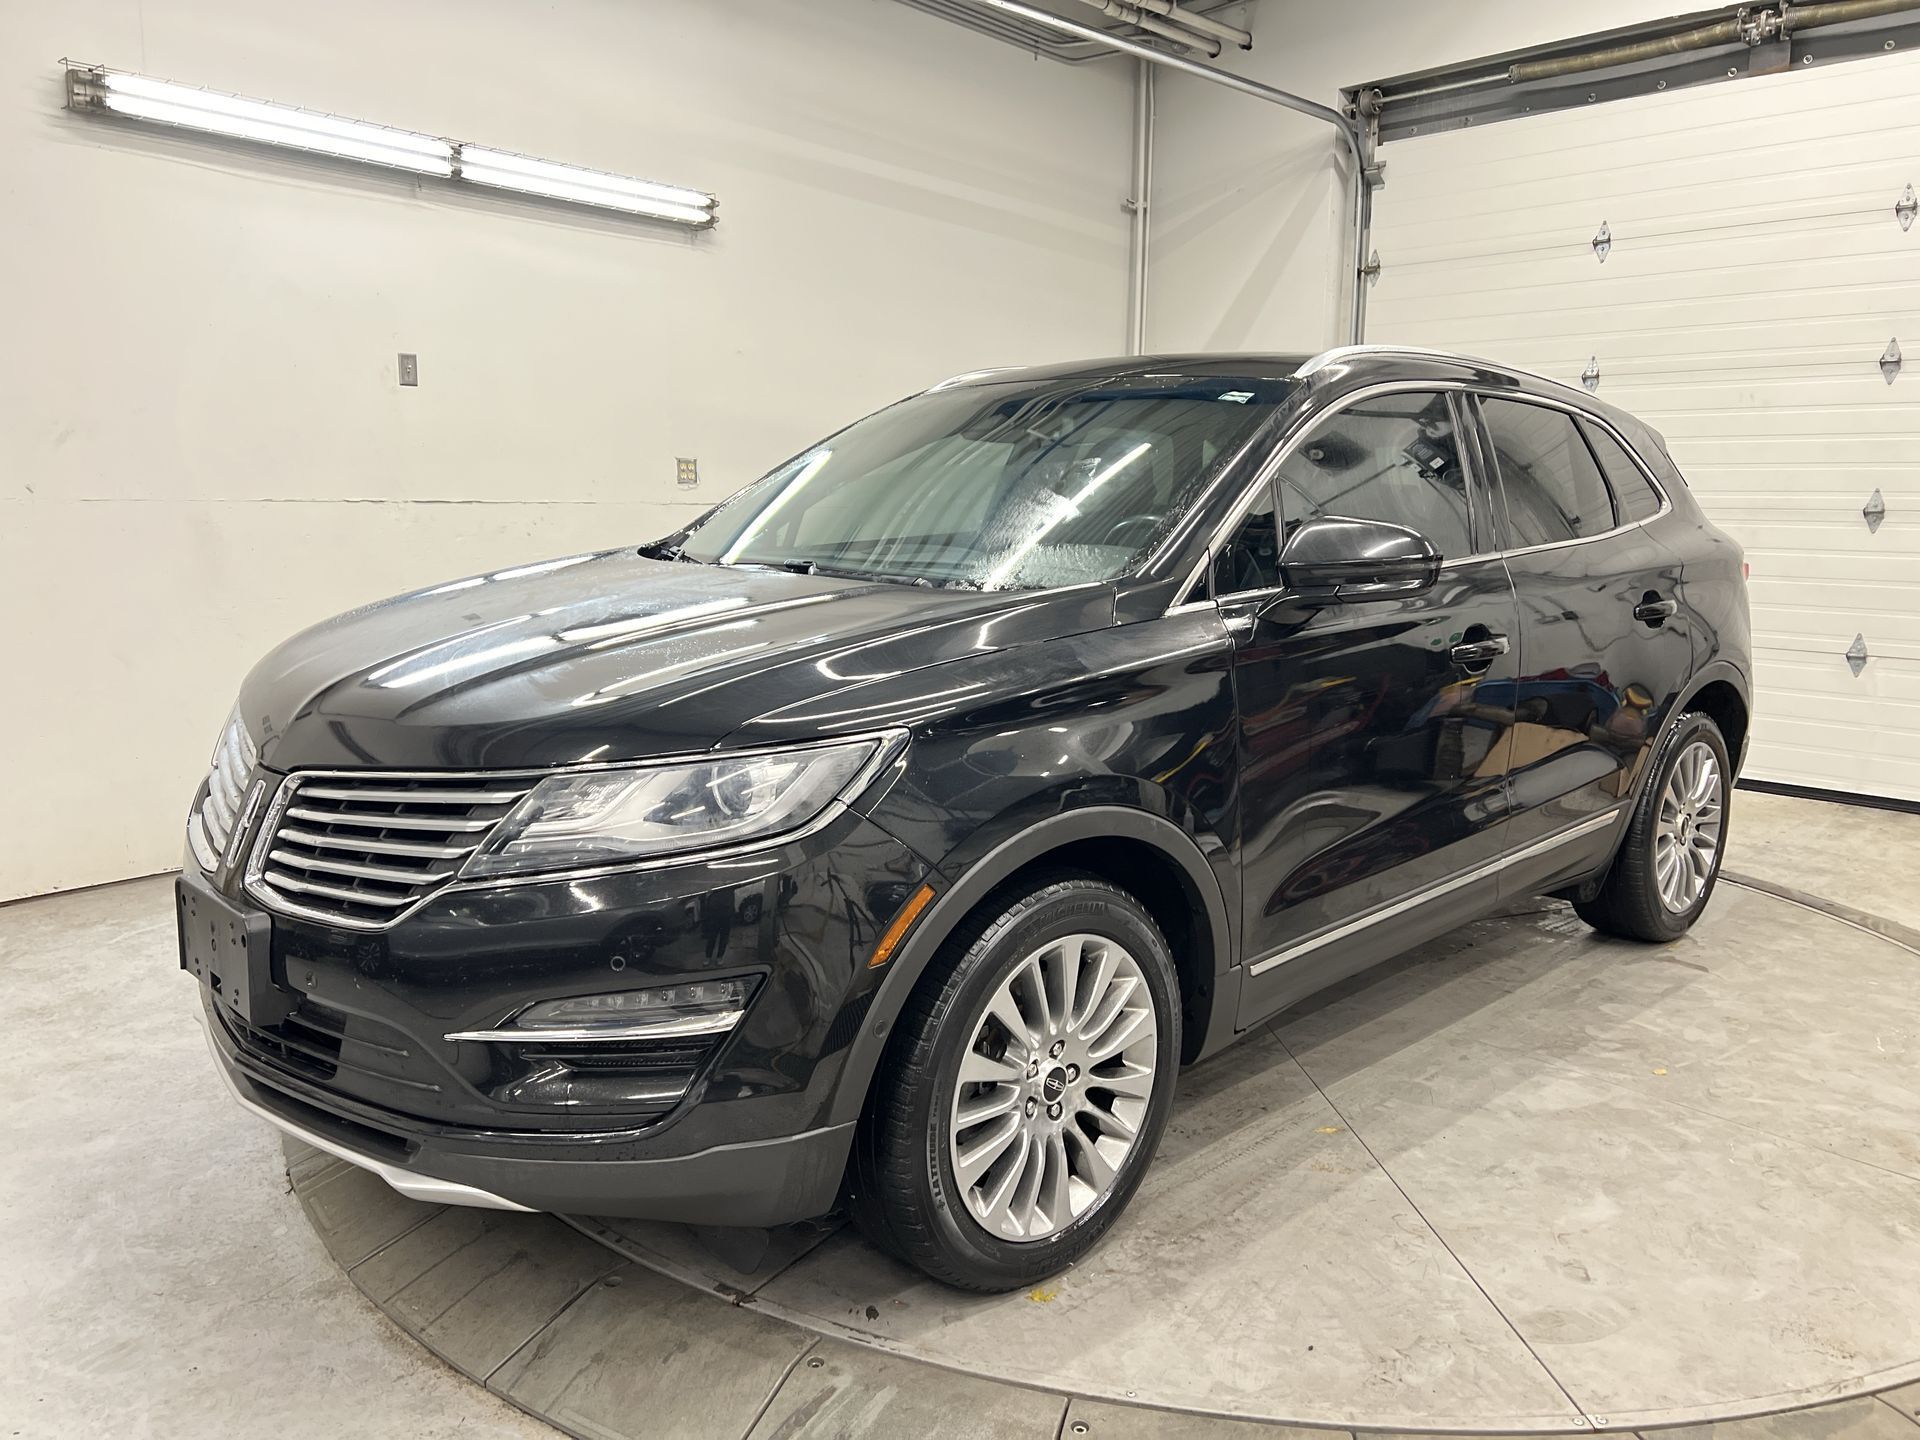 2015 Lincoln MKC RESERVE AWD | PANO ROOF | LEATHER |NAV |BLIND SPOT